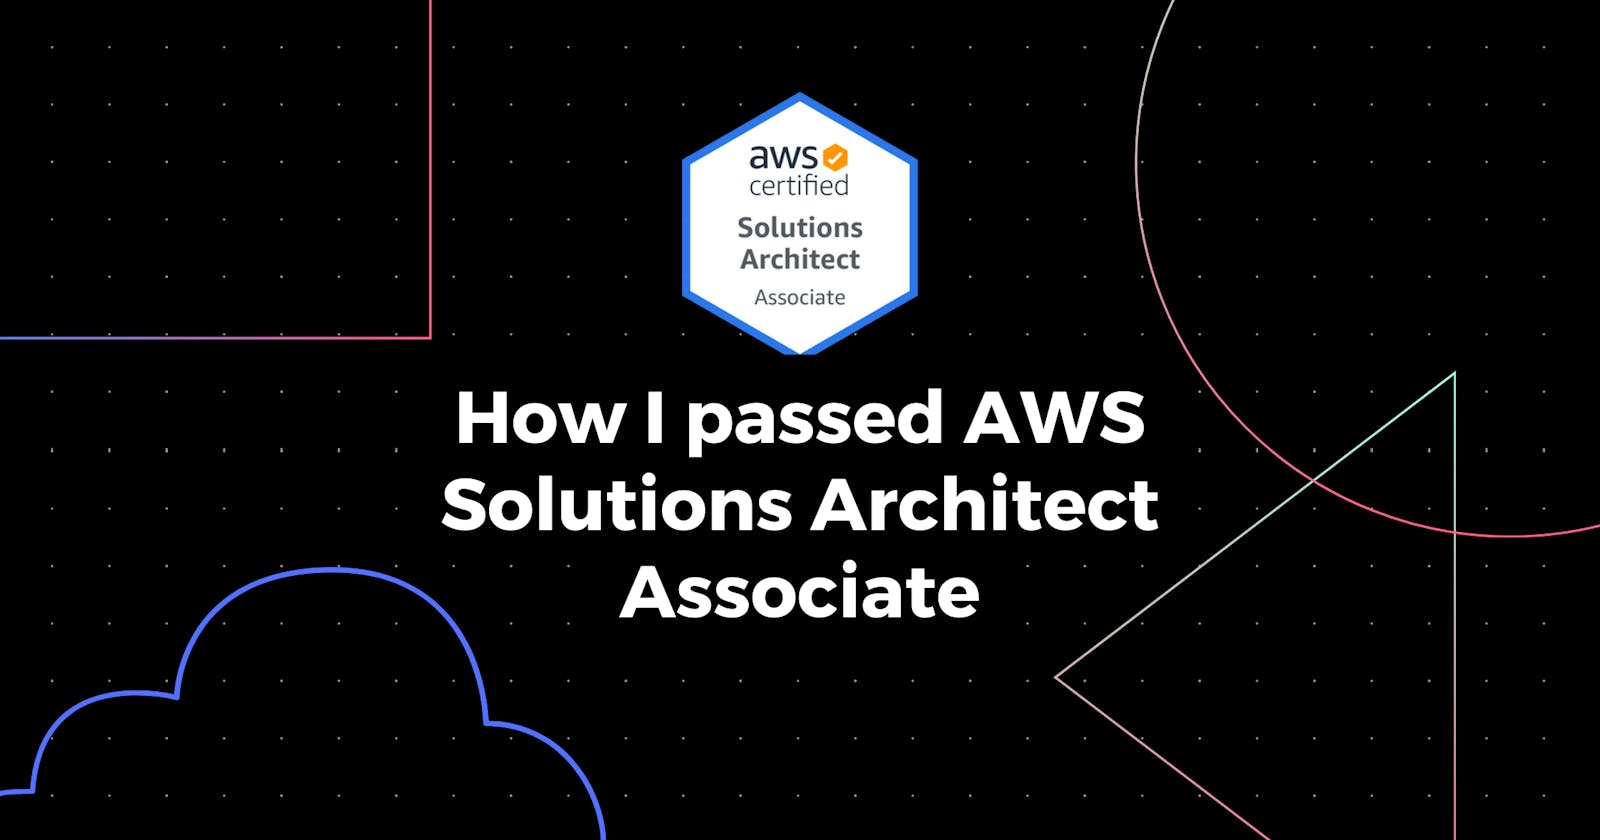 How I passed AWS Solutions Architect Associate